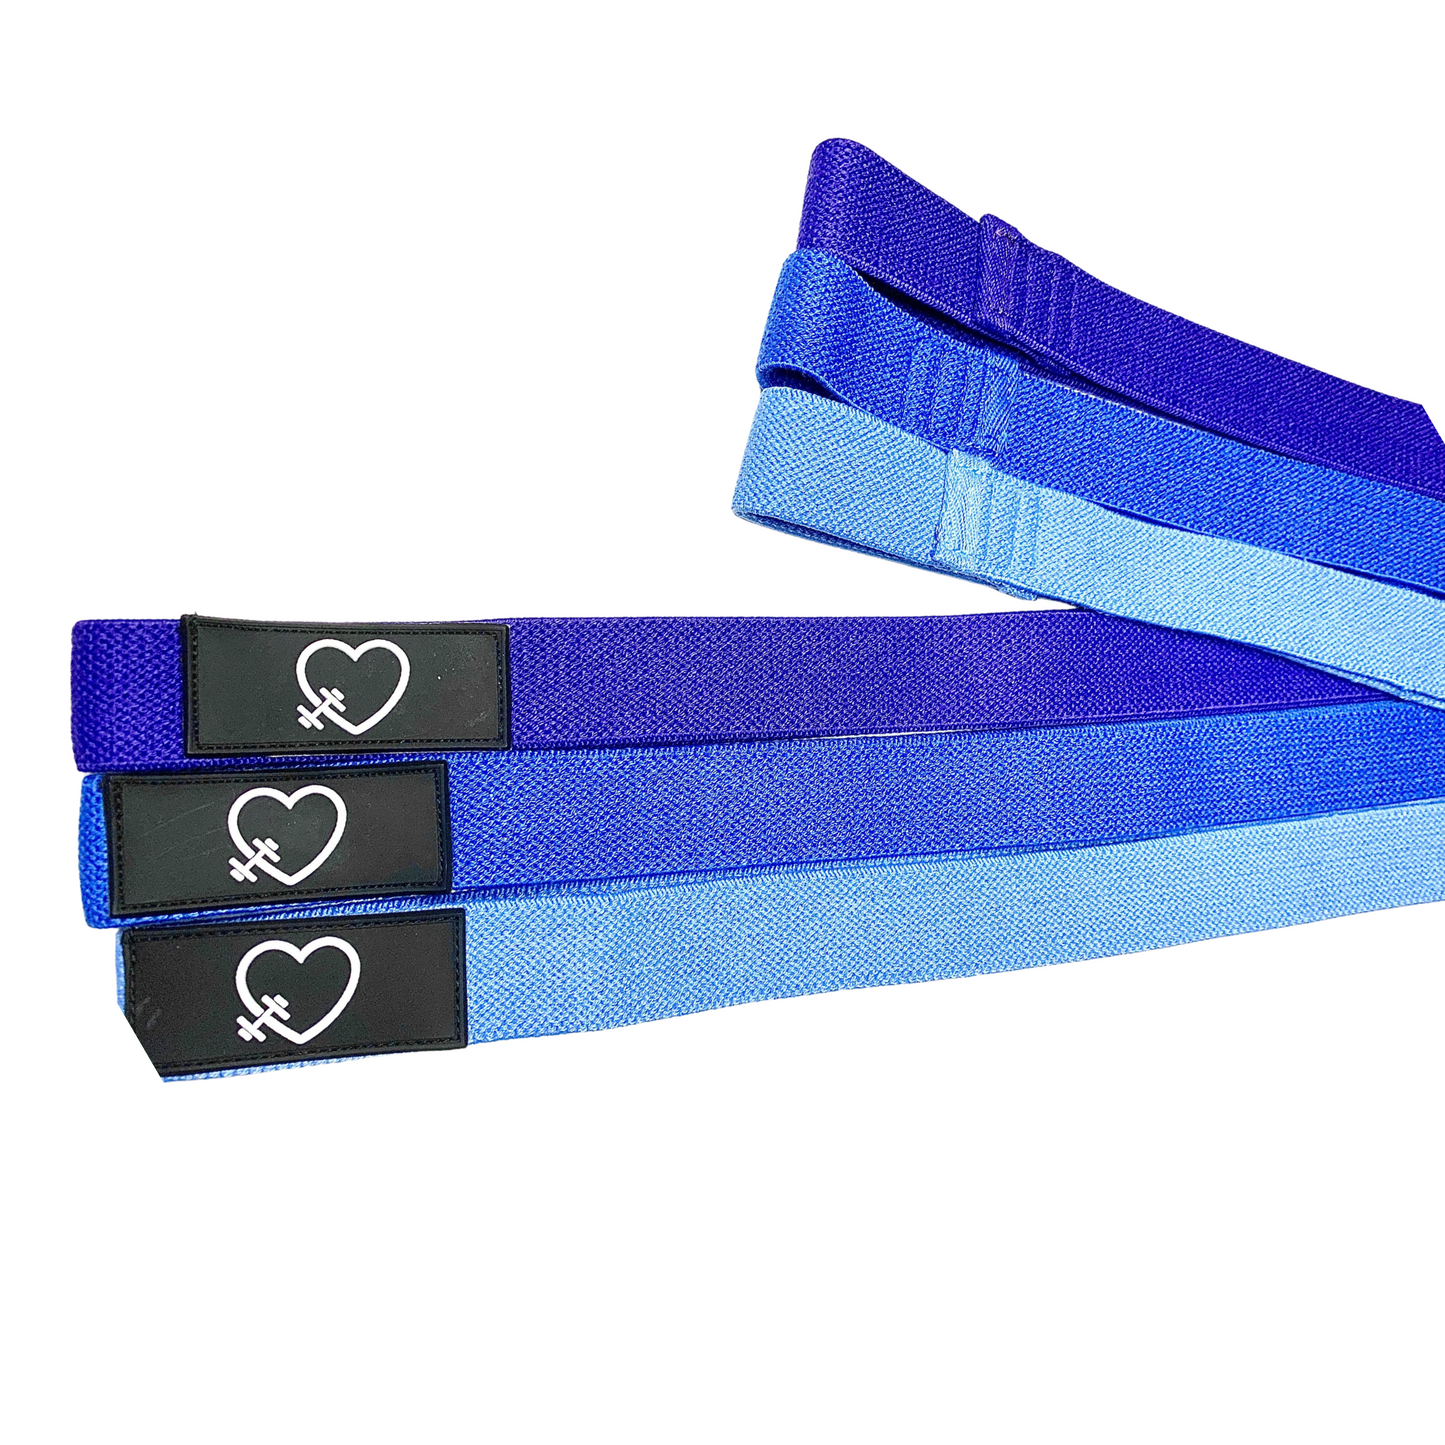 Set of 3 Fabric Resistance Bands